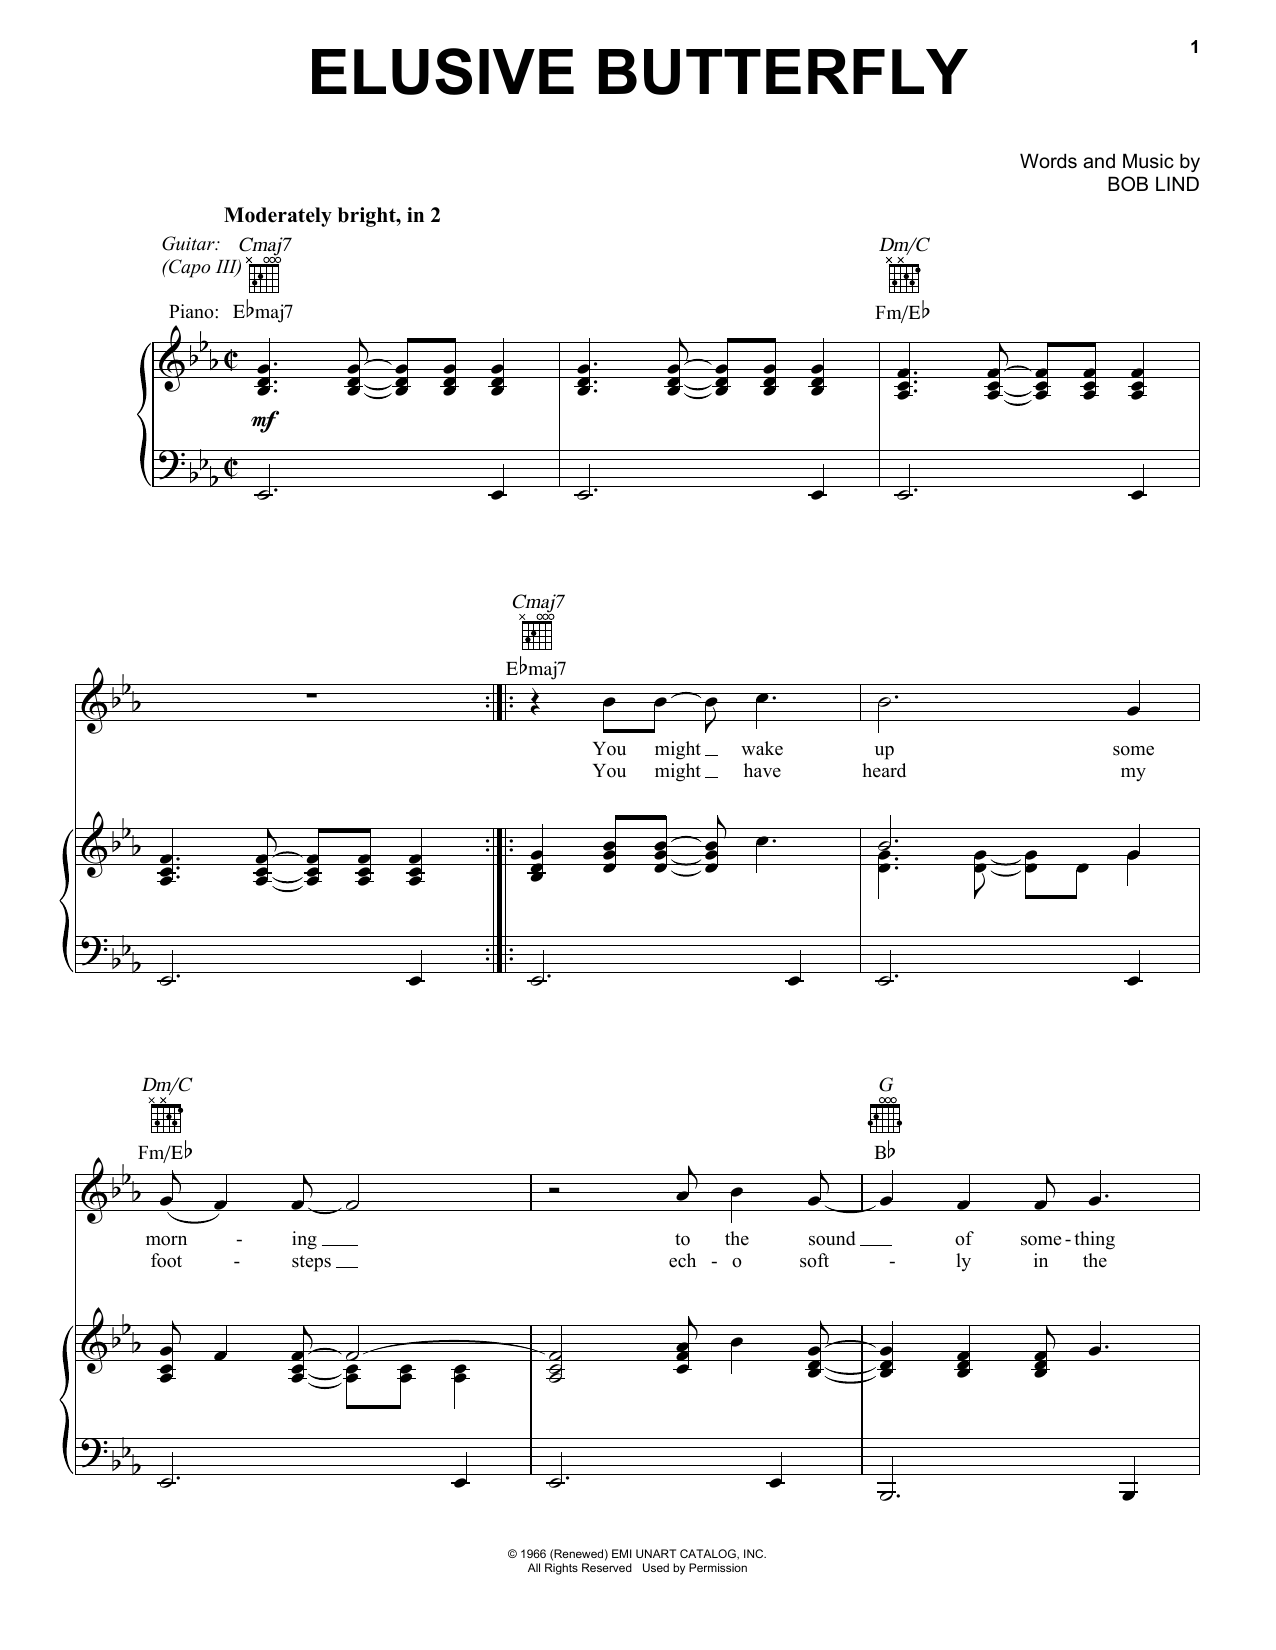 Download Bob Lind Elusive Butterfly Sheet Music